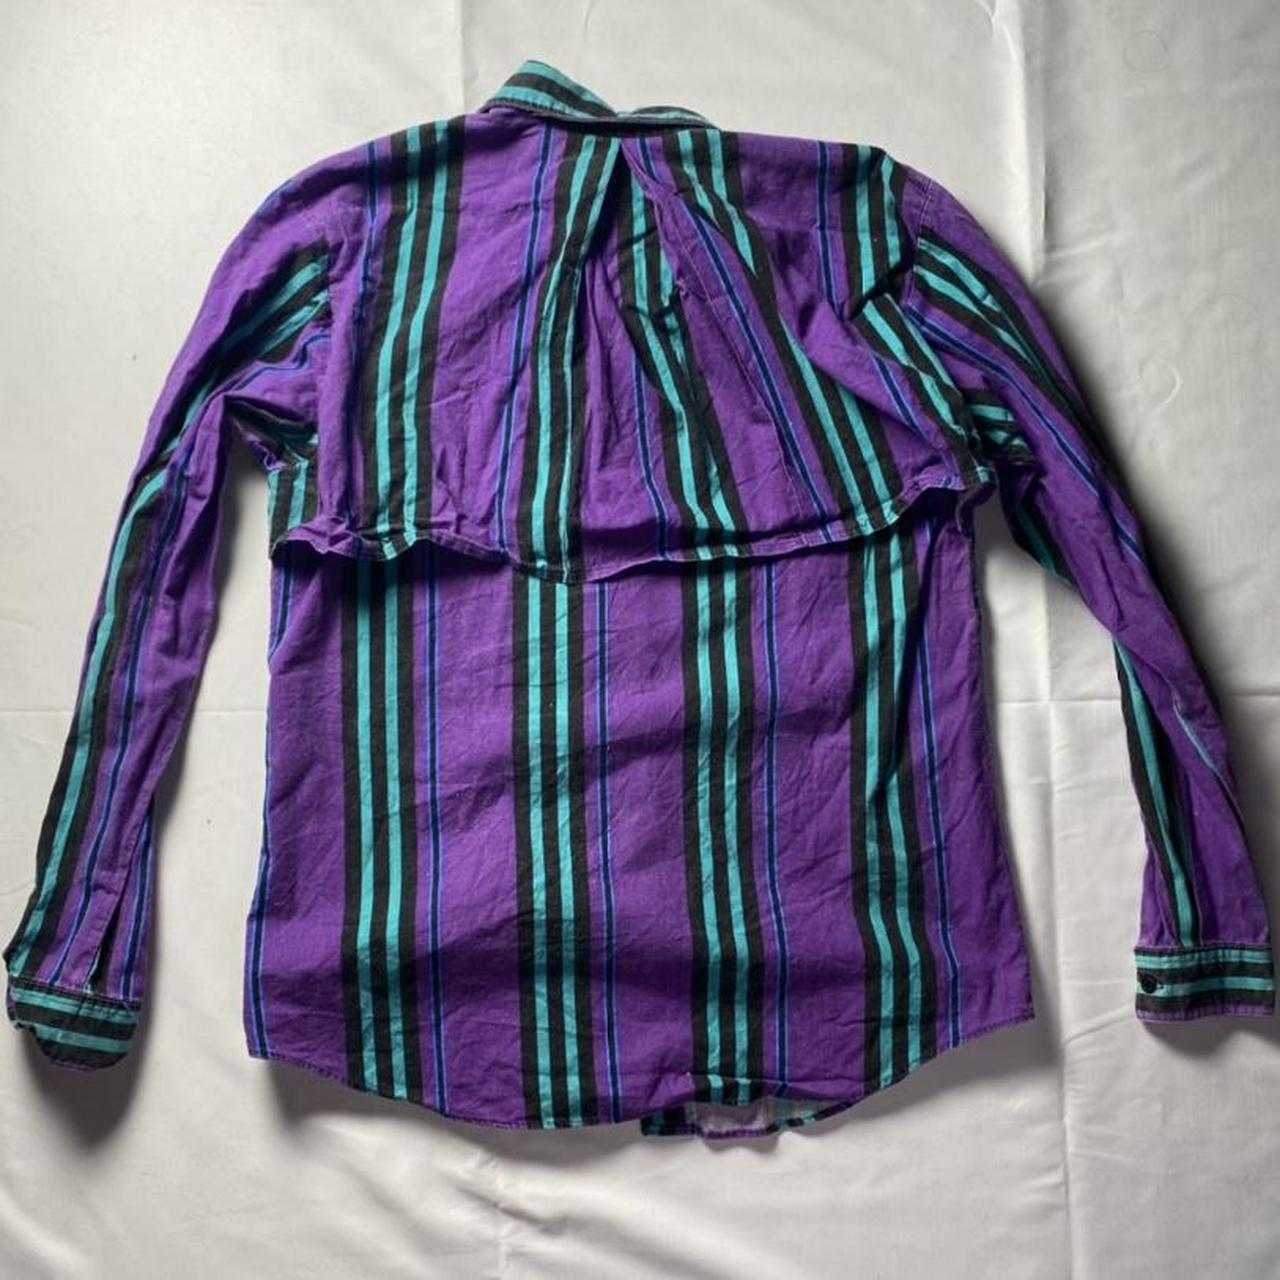 Product Image 3 - Purple and teal striped long